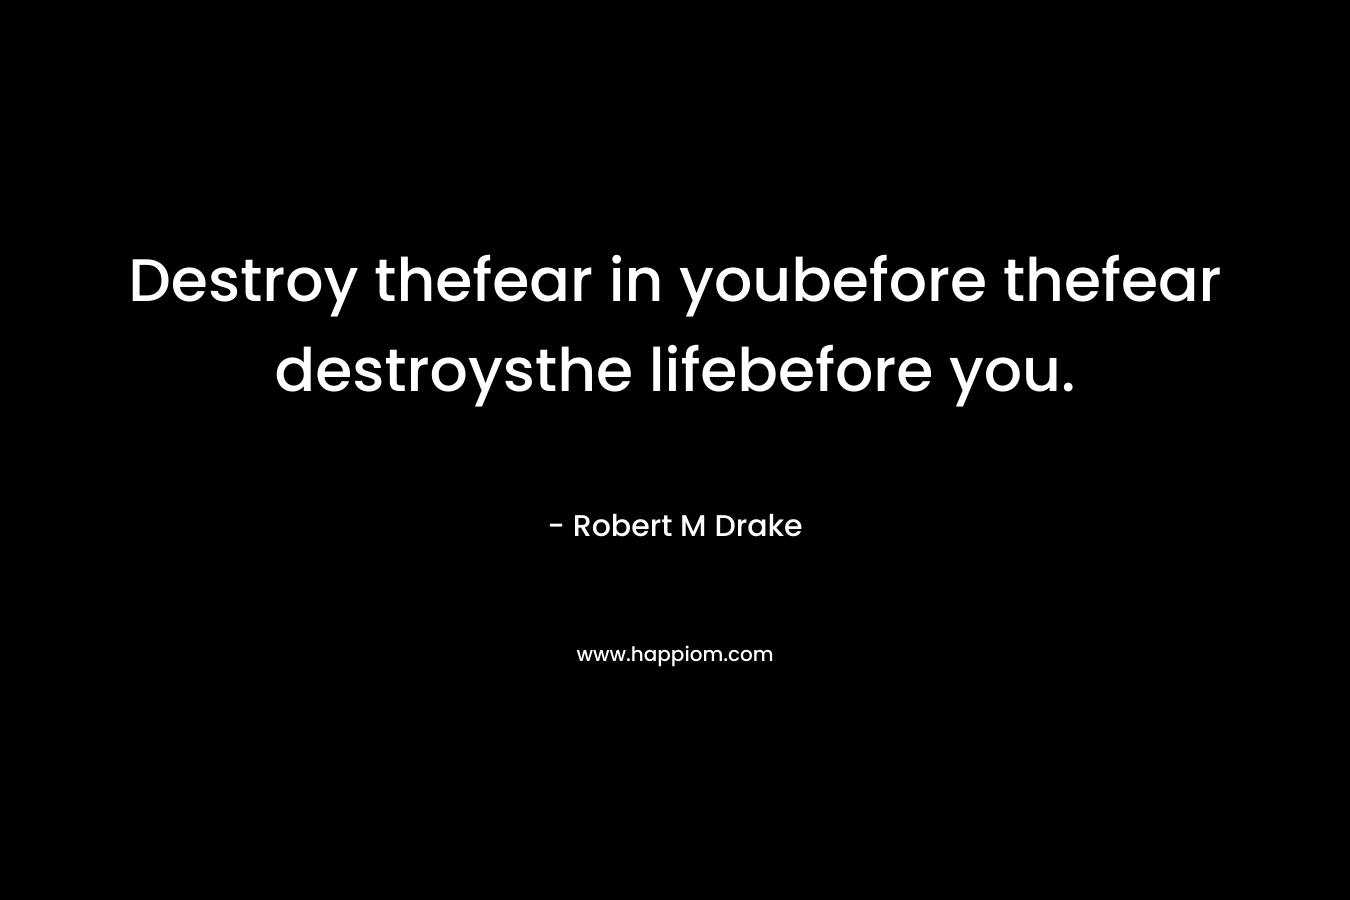 Destroy thefear in youbefore thefear destroysthe lifebefore you.